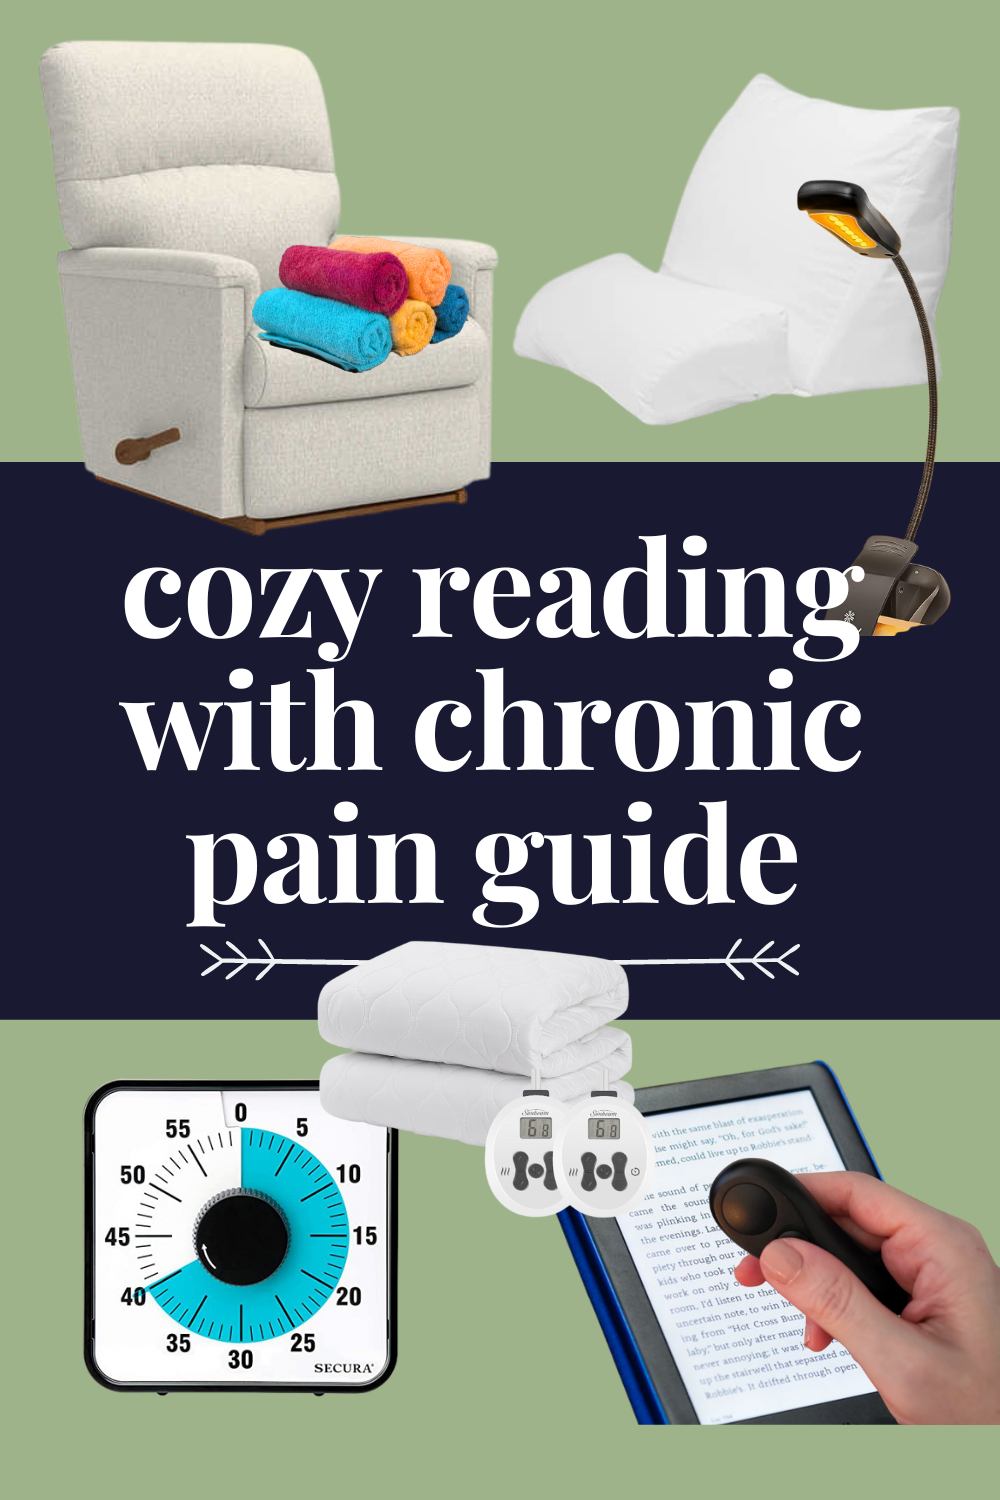 The Best Tools for Cozy Reading With Chronic Pain